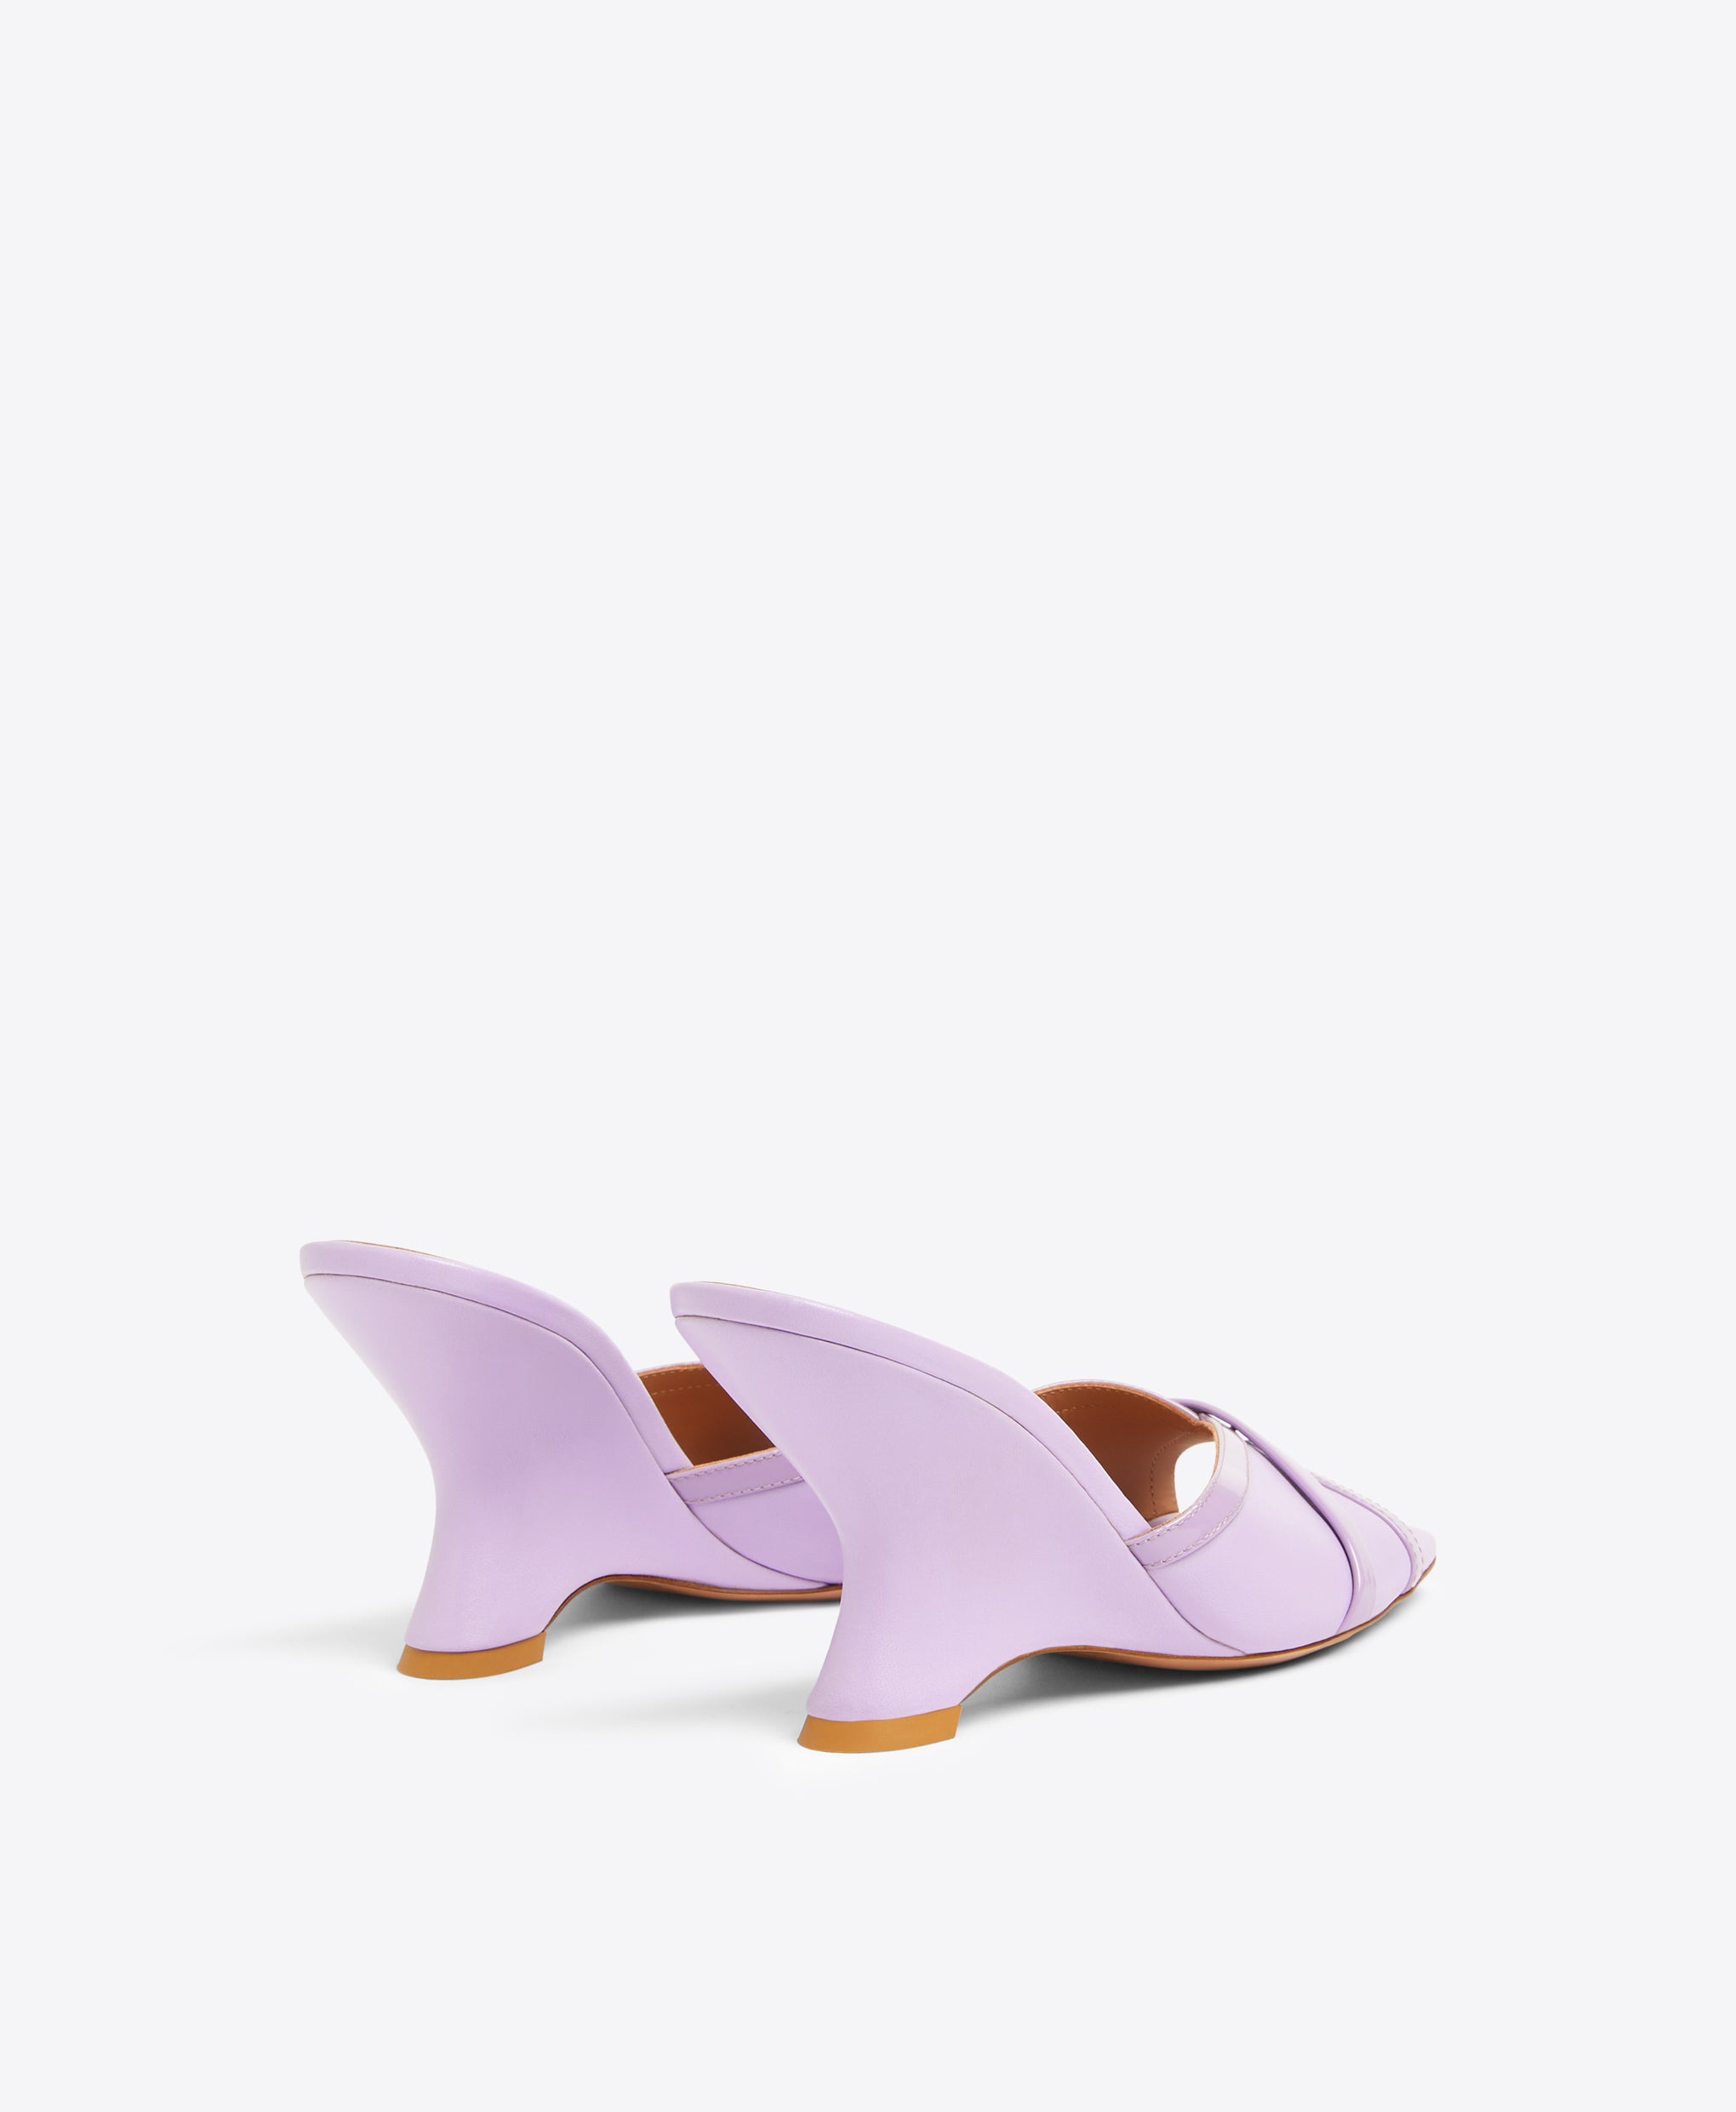 Perla 85 Lilac Leather Wedge Sandals Malone Souliers